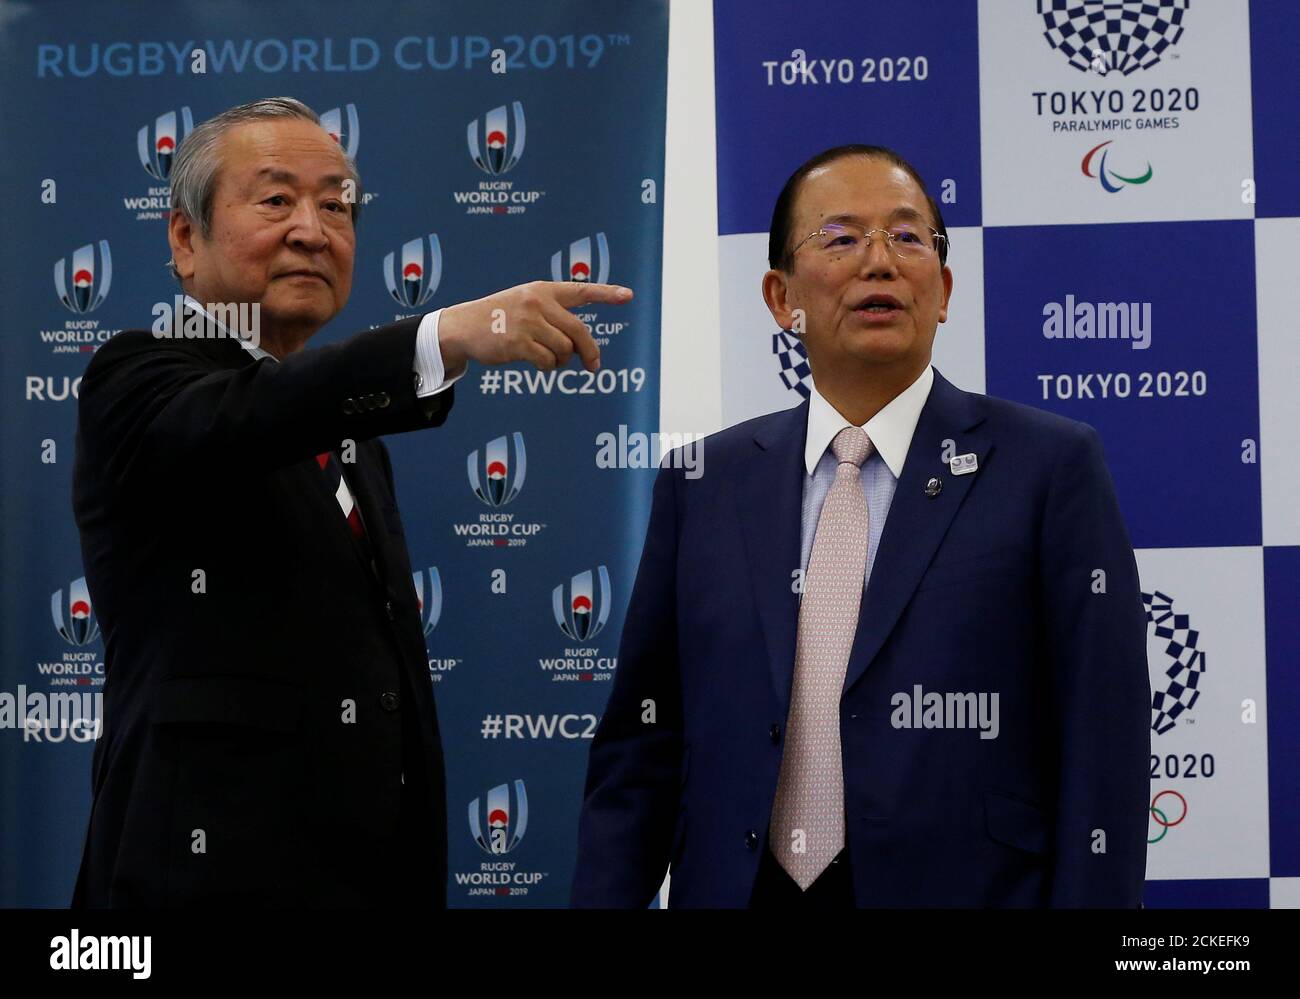 Toshiro Muto (R), CEO of Tokyo 2020 Organizing Committee of Olympic and  Paralympic games, and Akira Shimazu, CEO of the Rugby World Cup 2019  Organizing Committee, attend their signing ceremony on their